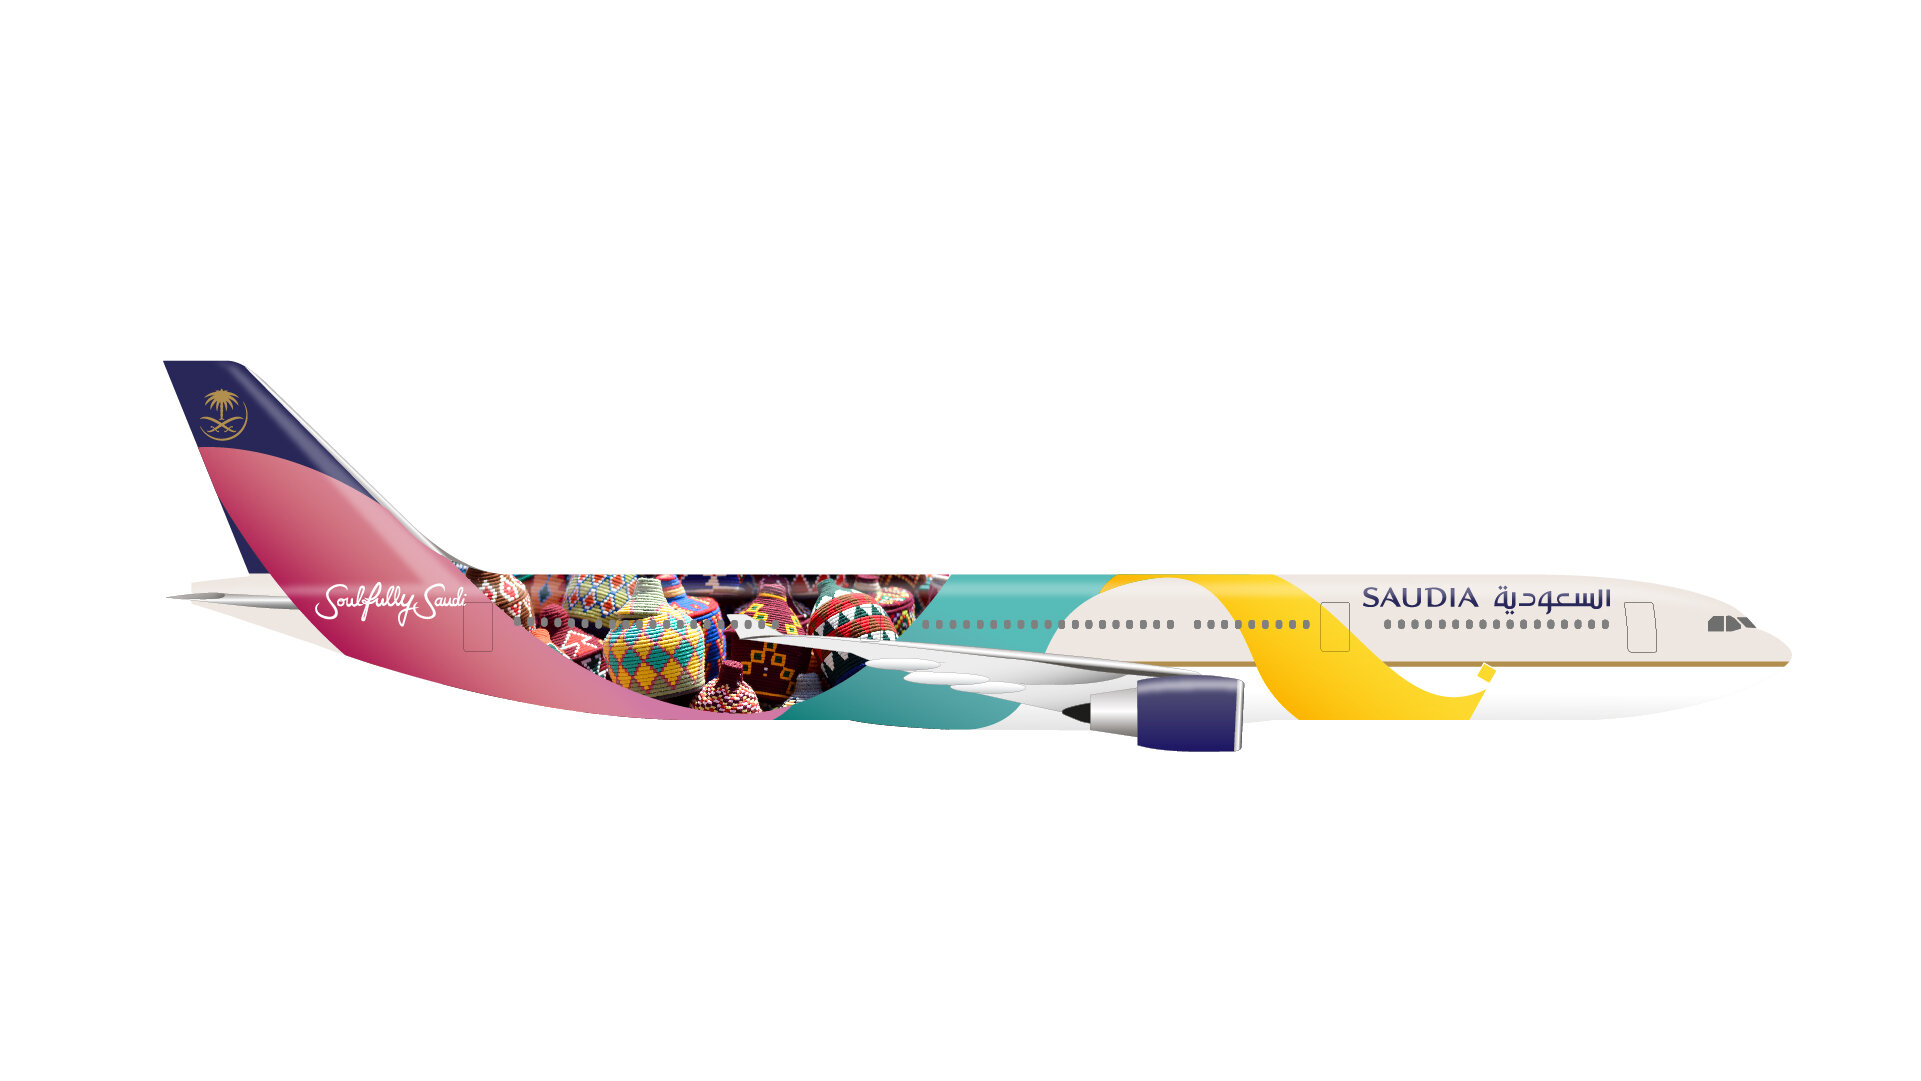 SAUDIA_Route 1_Exploration_Livery - 4_Plane RIGHT SIDE 2.jpg